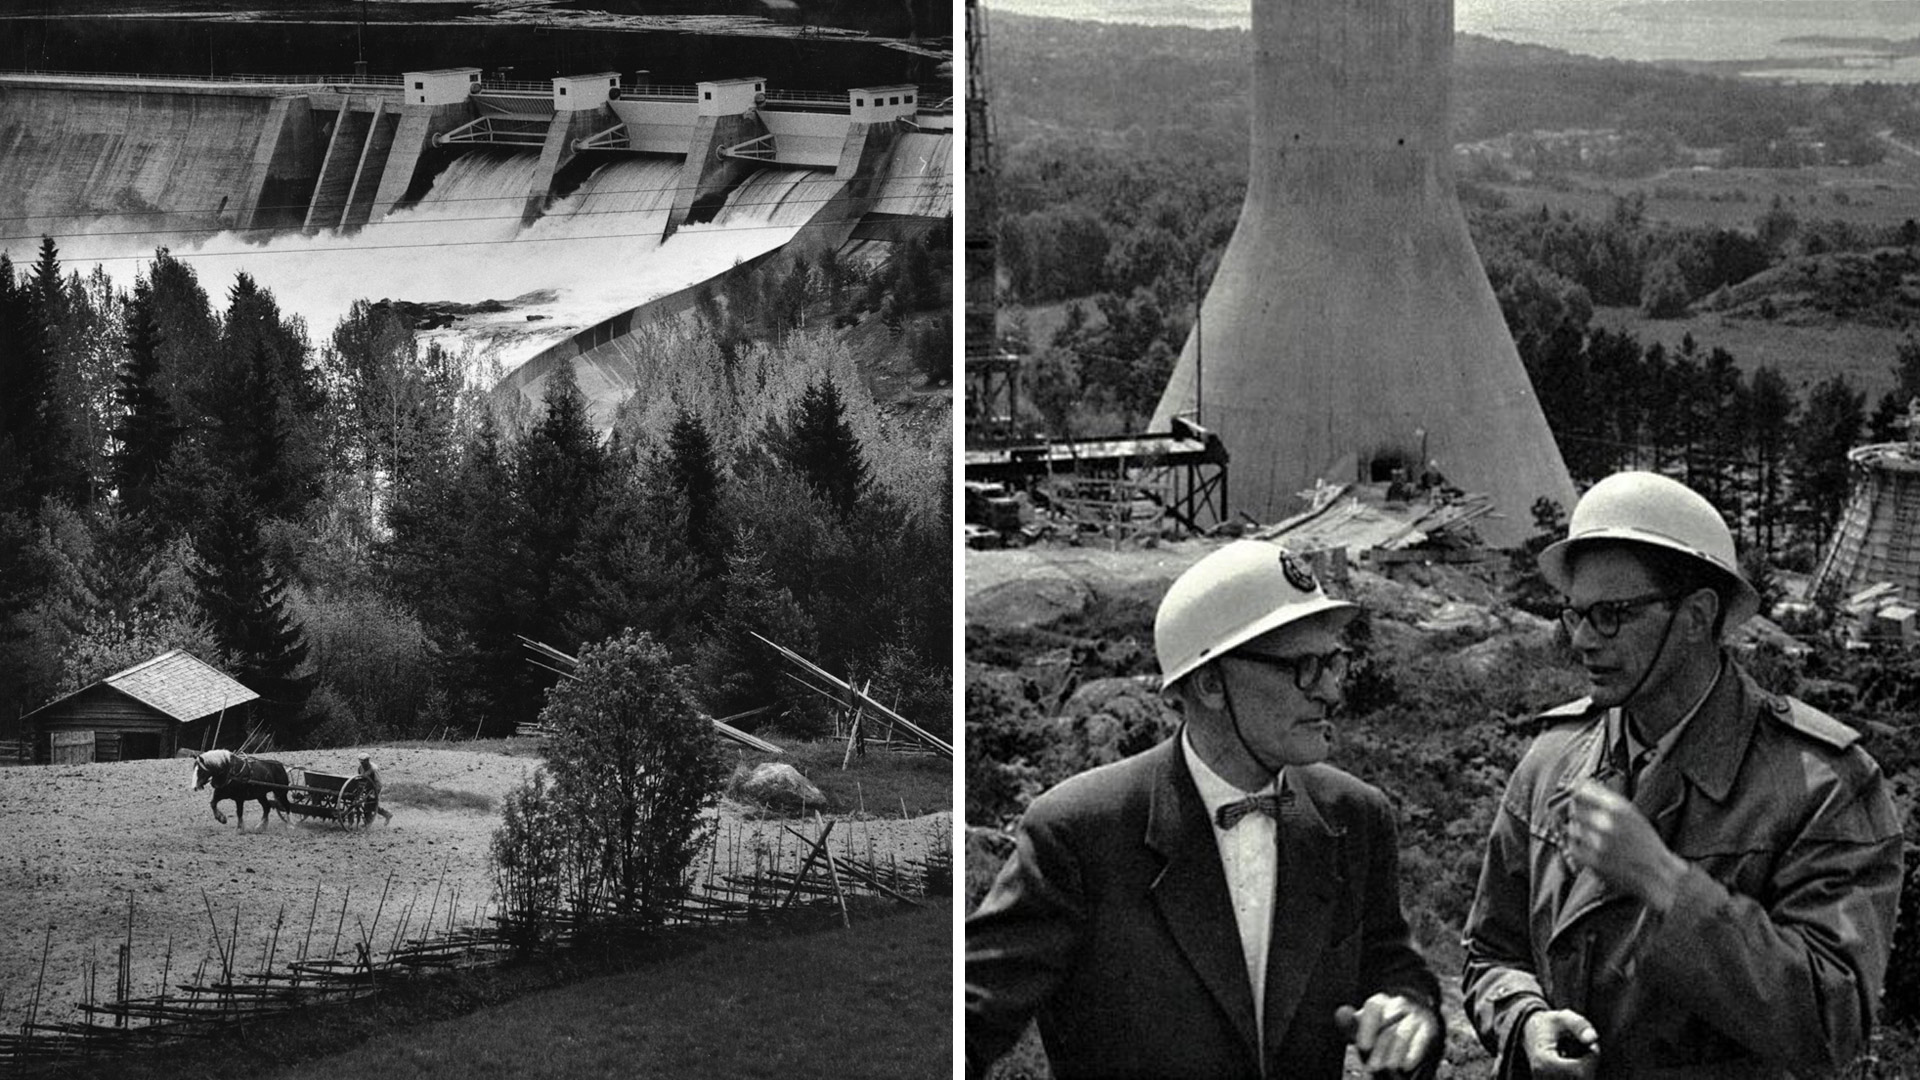 Black and white photos - a man and a horse at the Stadsforsens hydro power plant, and two men smoking at Stenungsundsverket. Photo: Lennart Nilsson